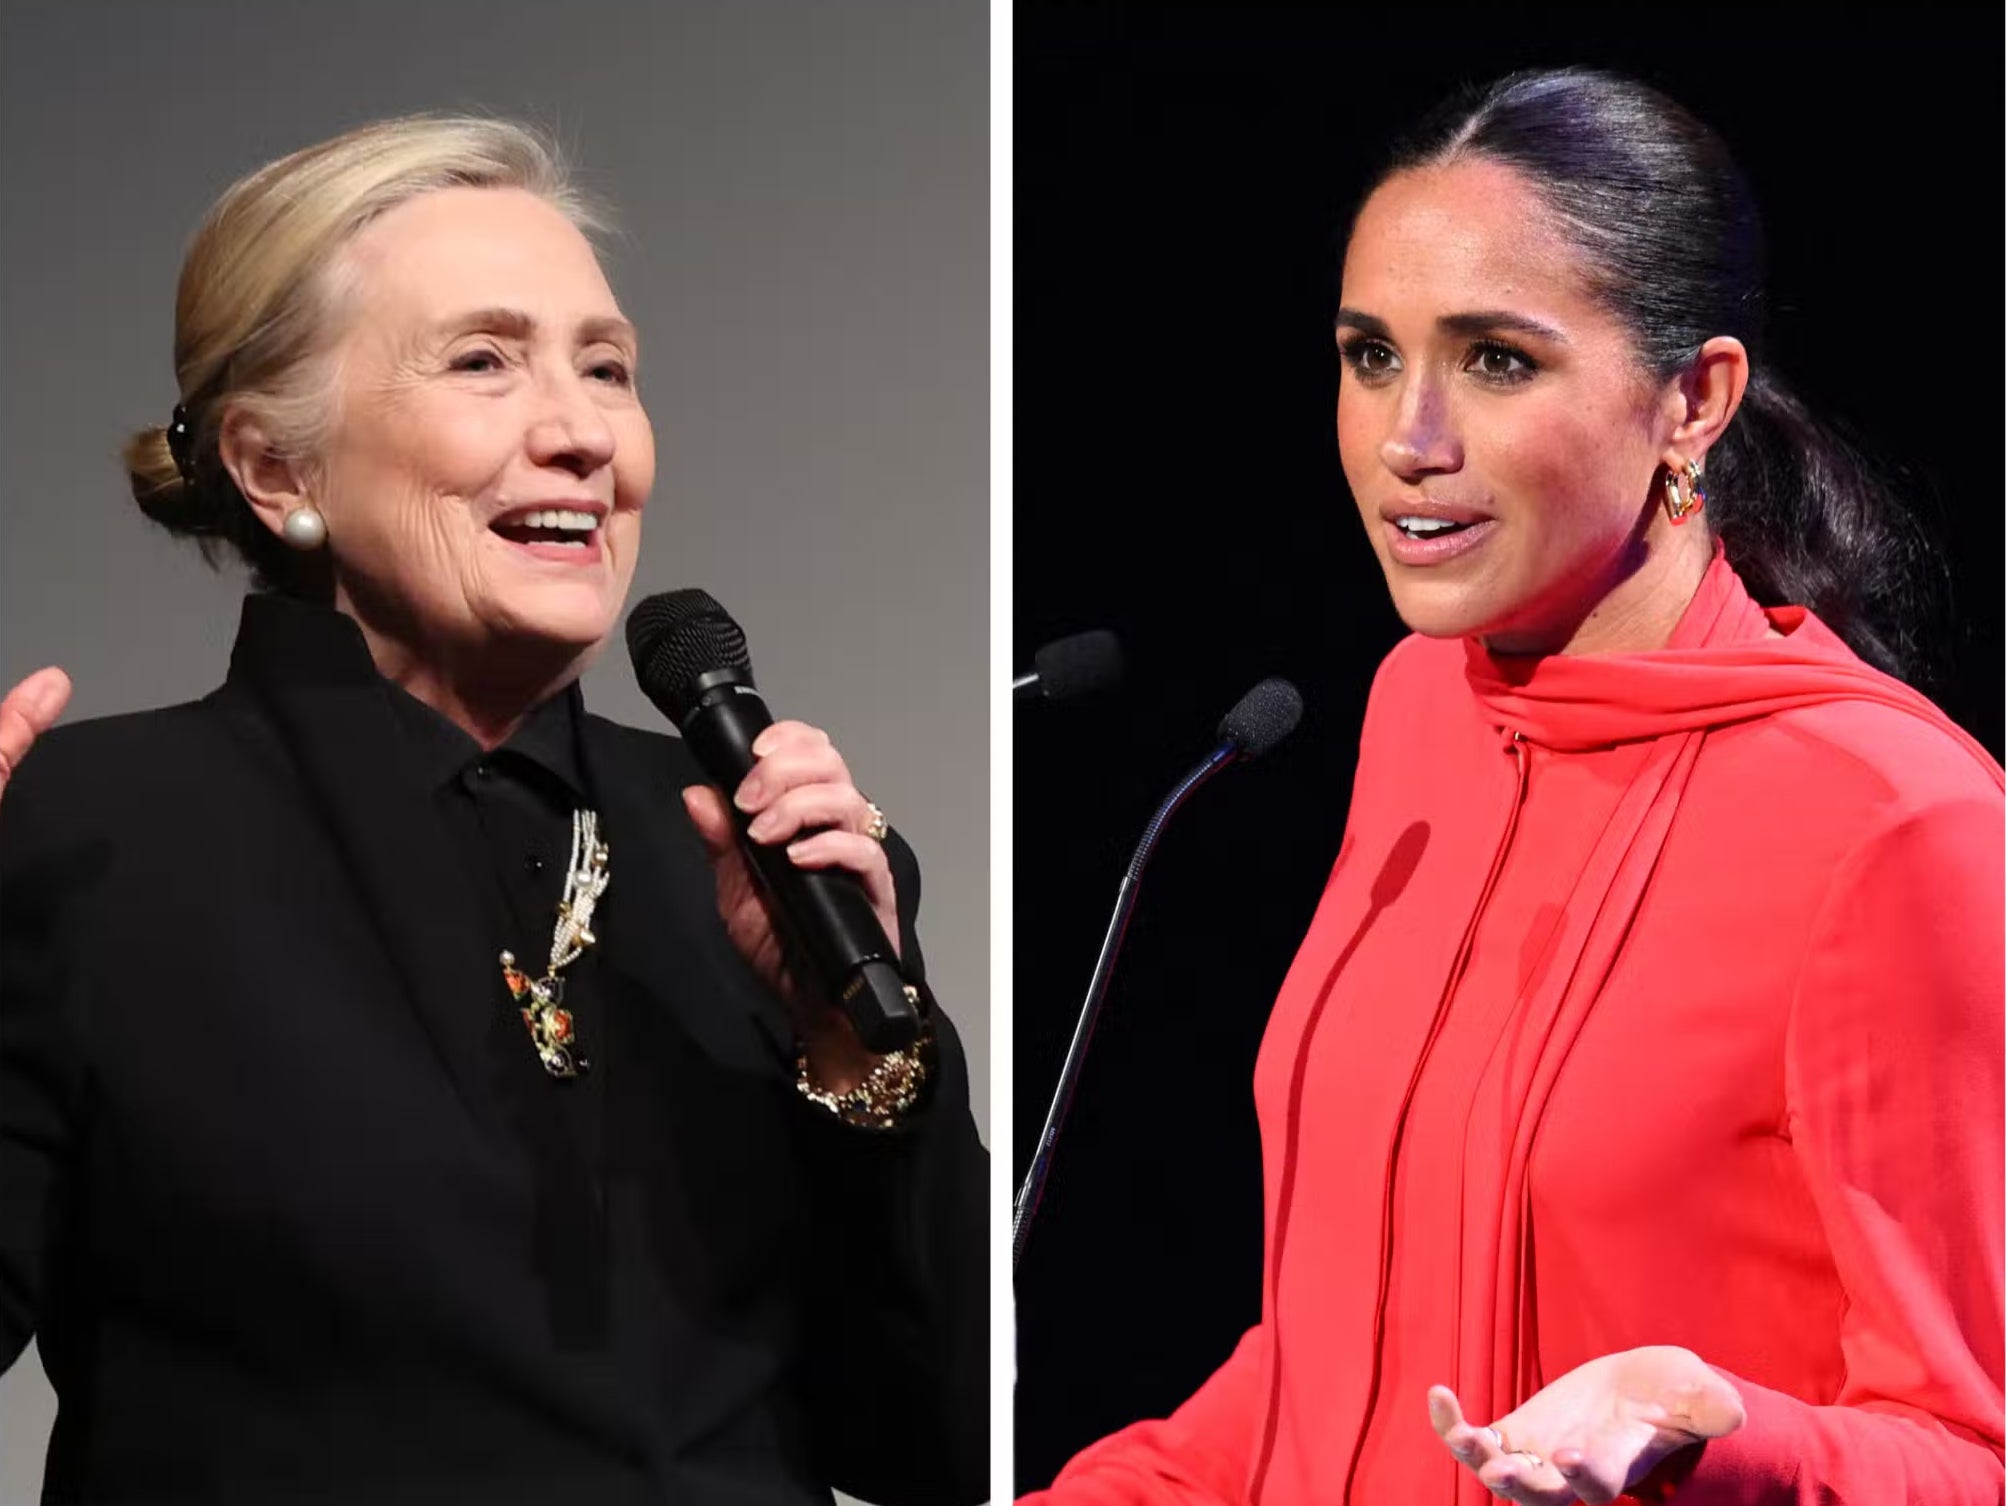 Hillary Clinton and the Duchess of Sussex